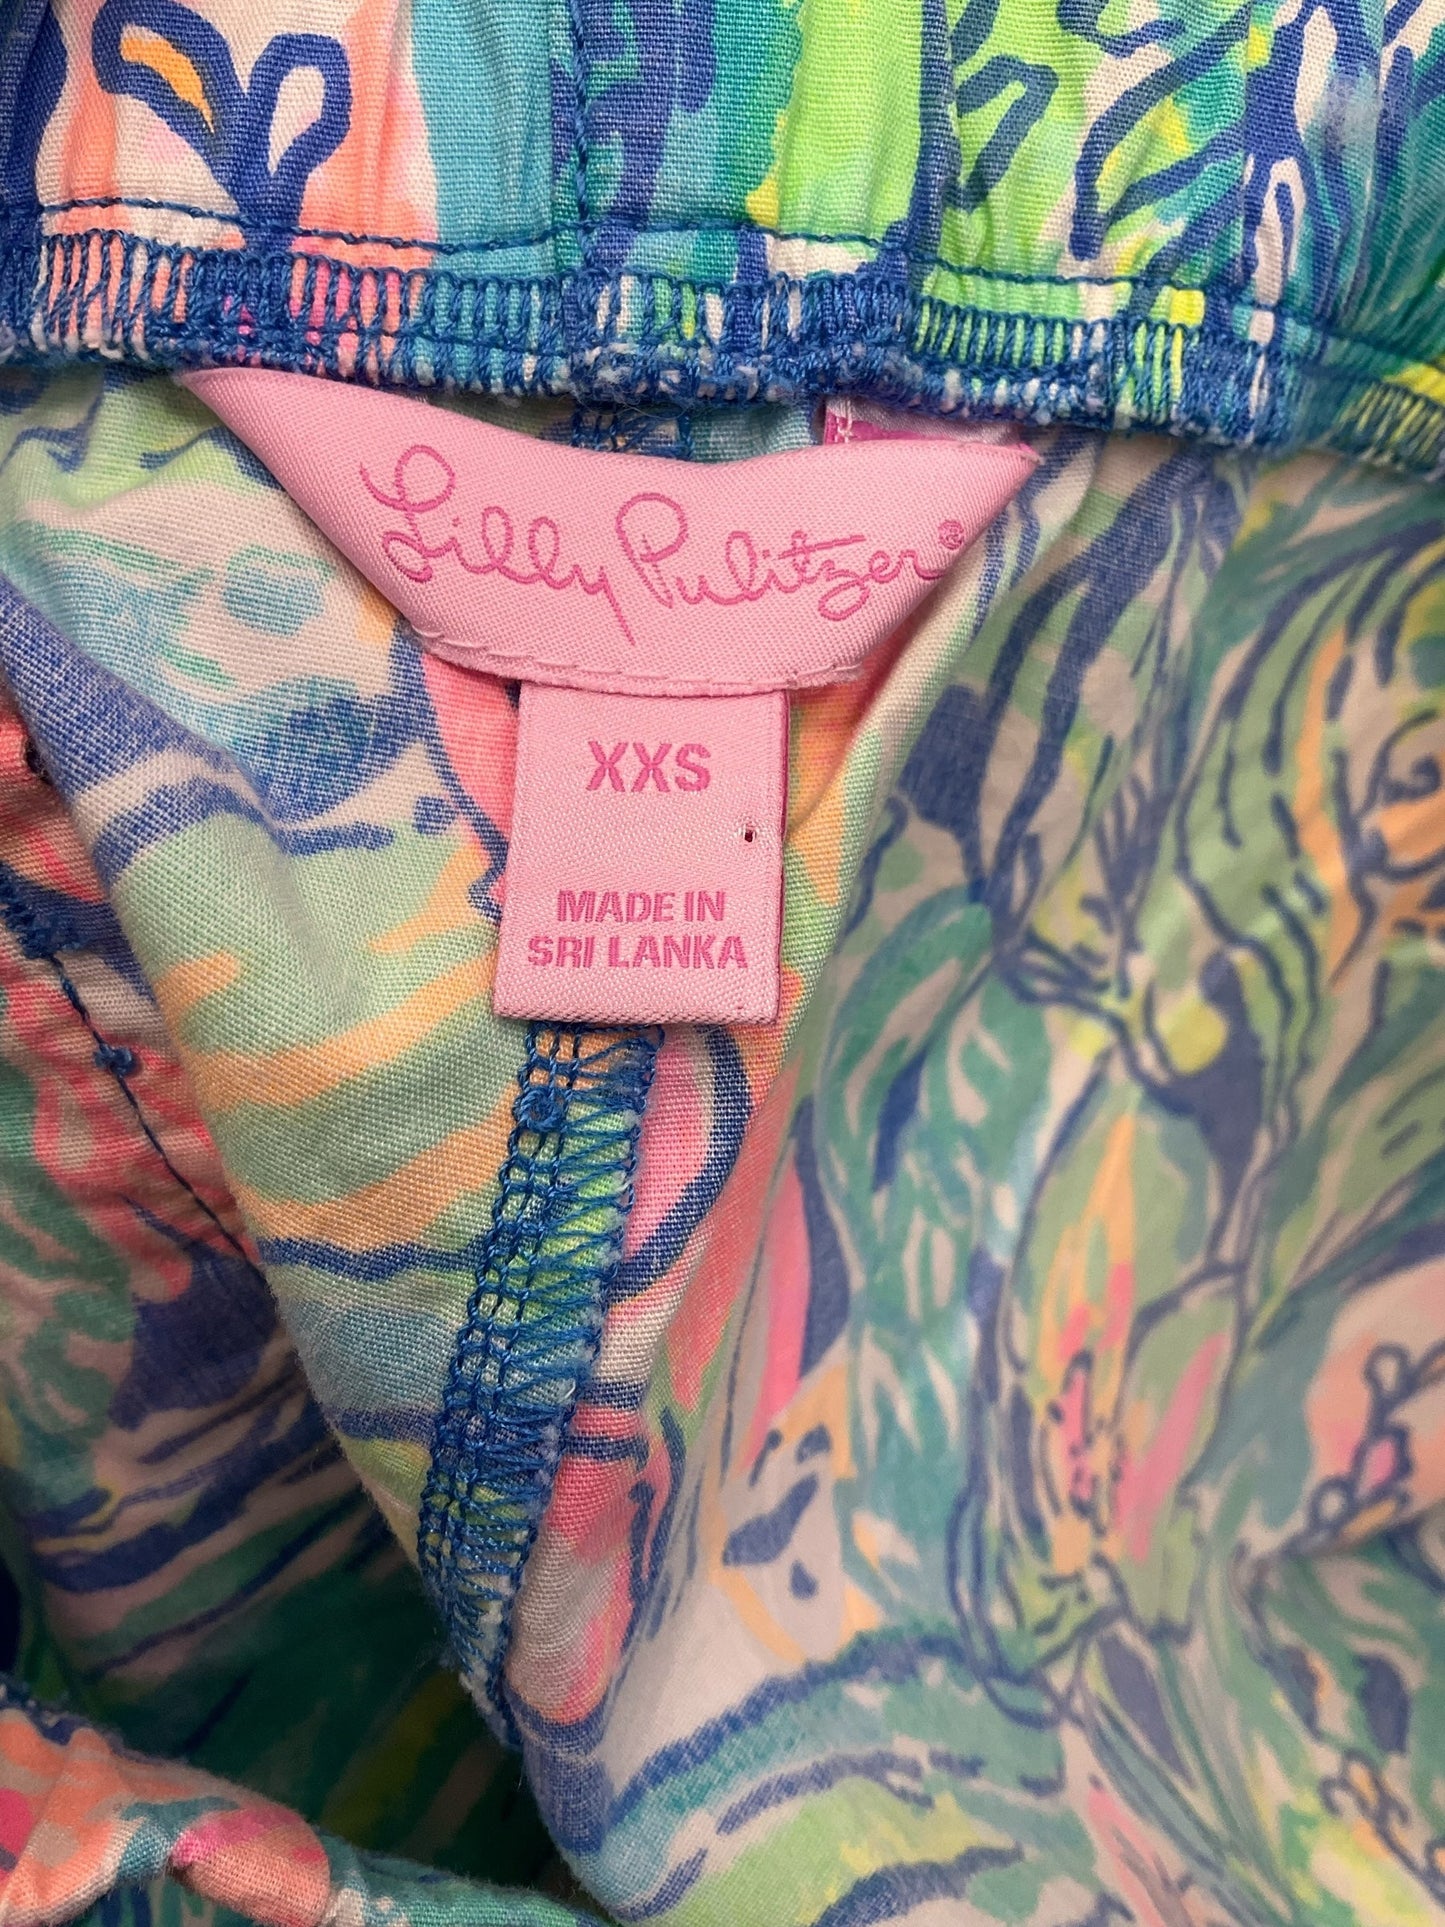 Teal Shorts Lilly Pulitzer, Size Xxs